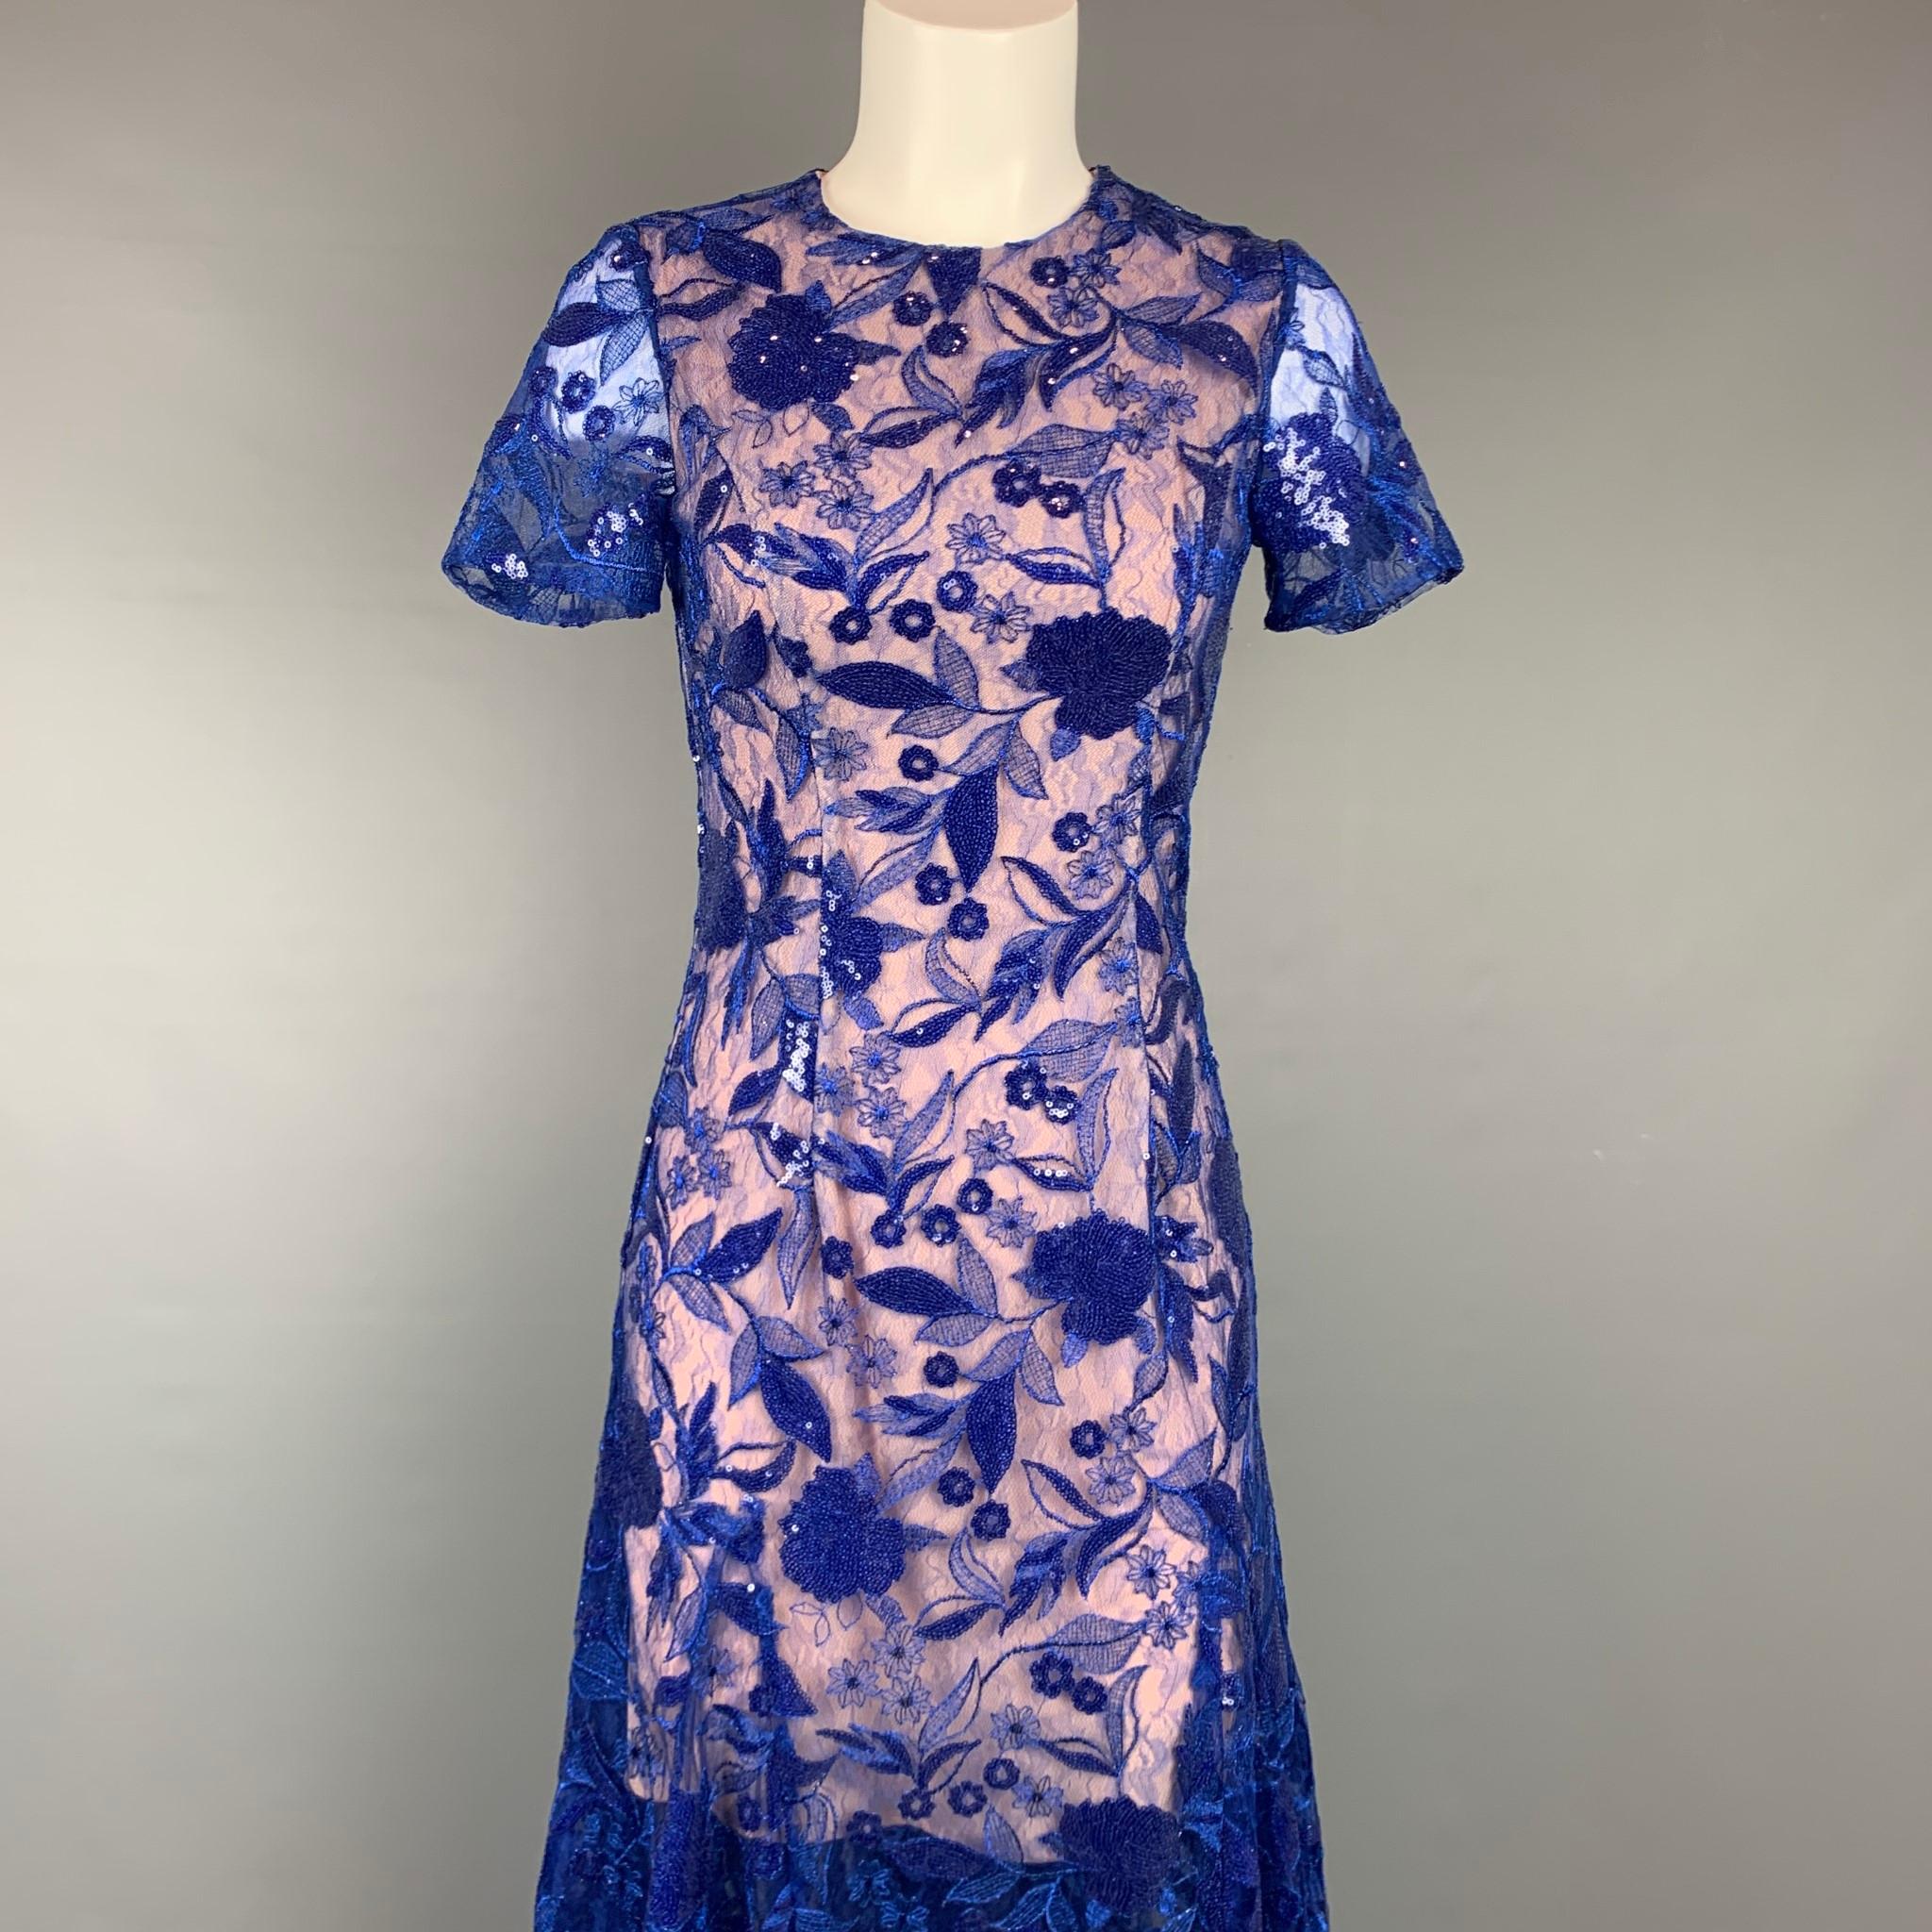 COSTARELLOS cocktail dress comes in a blue sequin polyester / nylon with a nude slip liner featuring an a-line style, short sleeves, embroidered designs, and a back zip up closure. 

Very Good Pre-Owned Condition.
Marked: